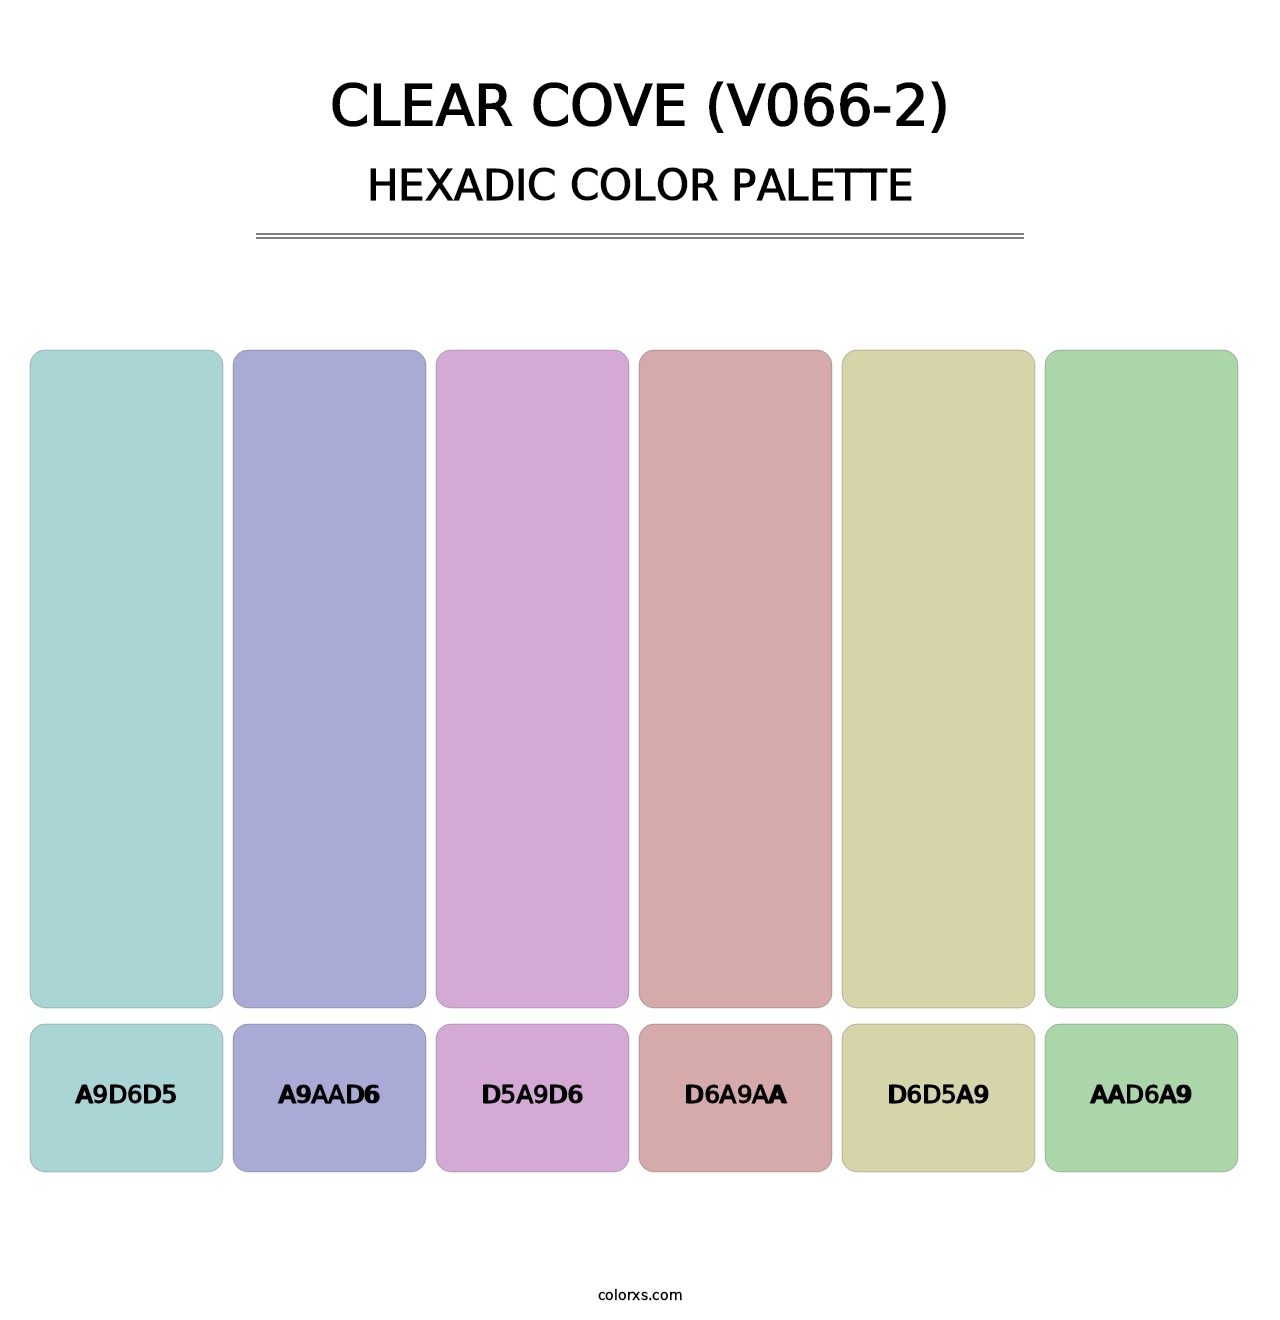 Clear Cove (V066-2) - Hexadic Color Palette